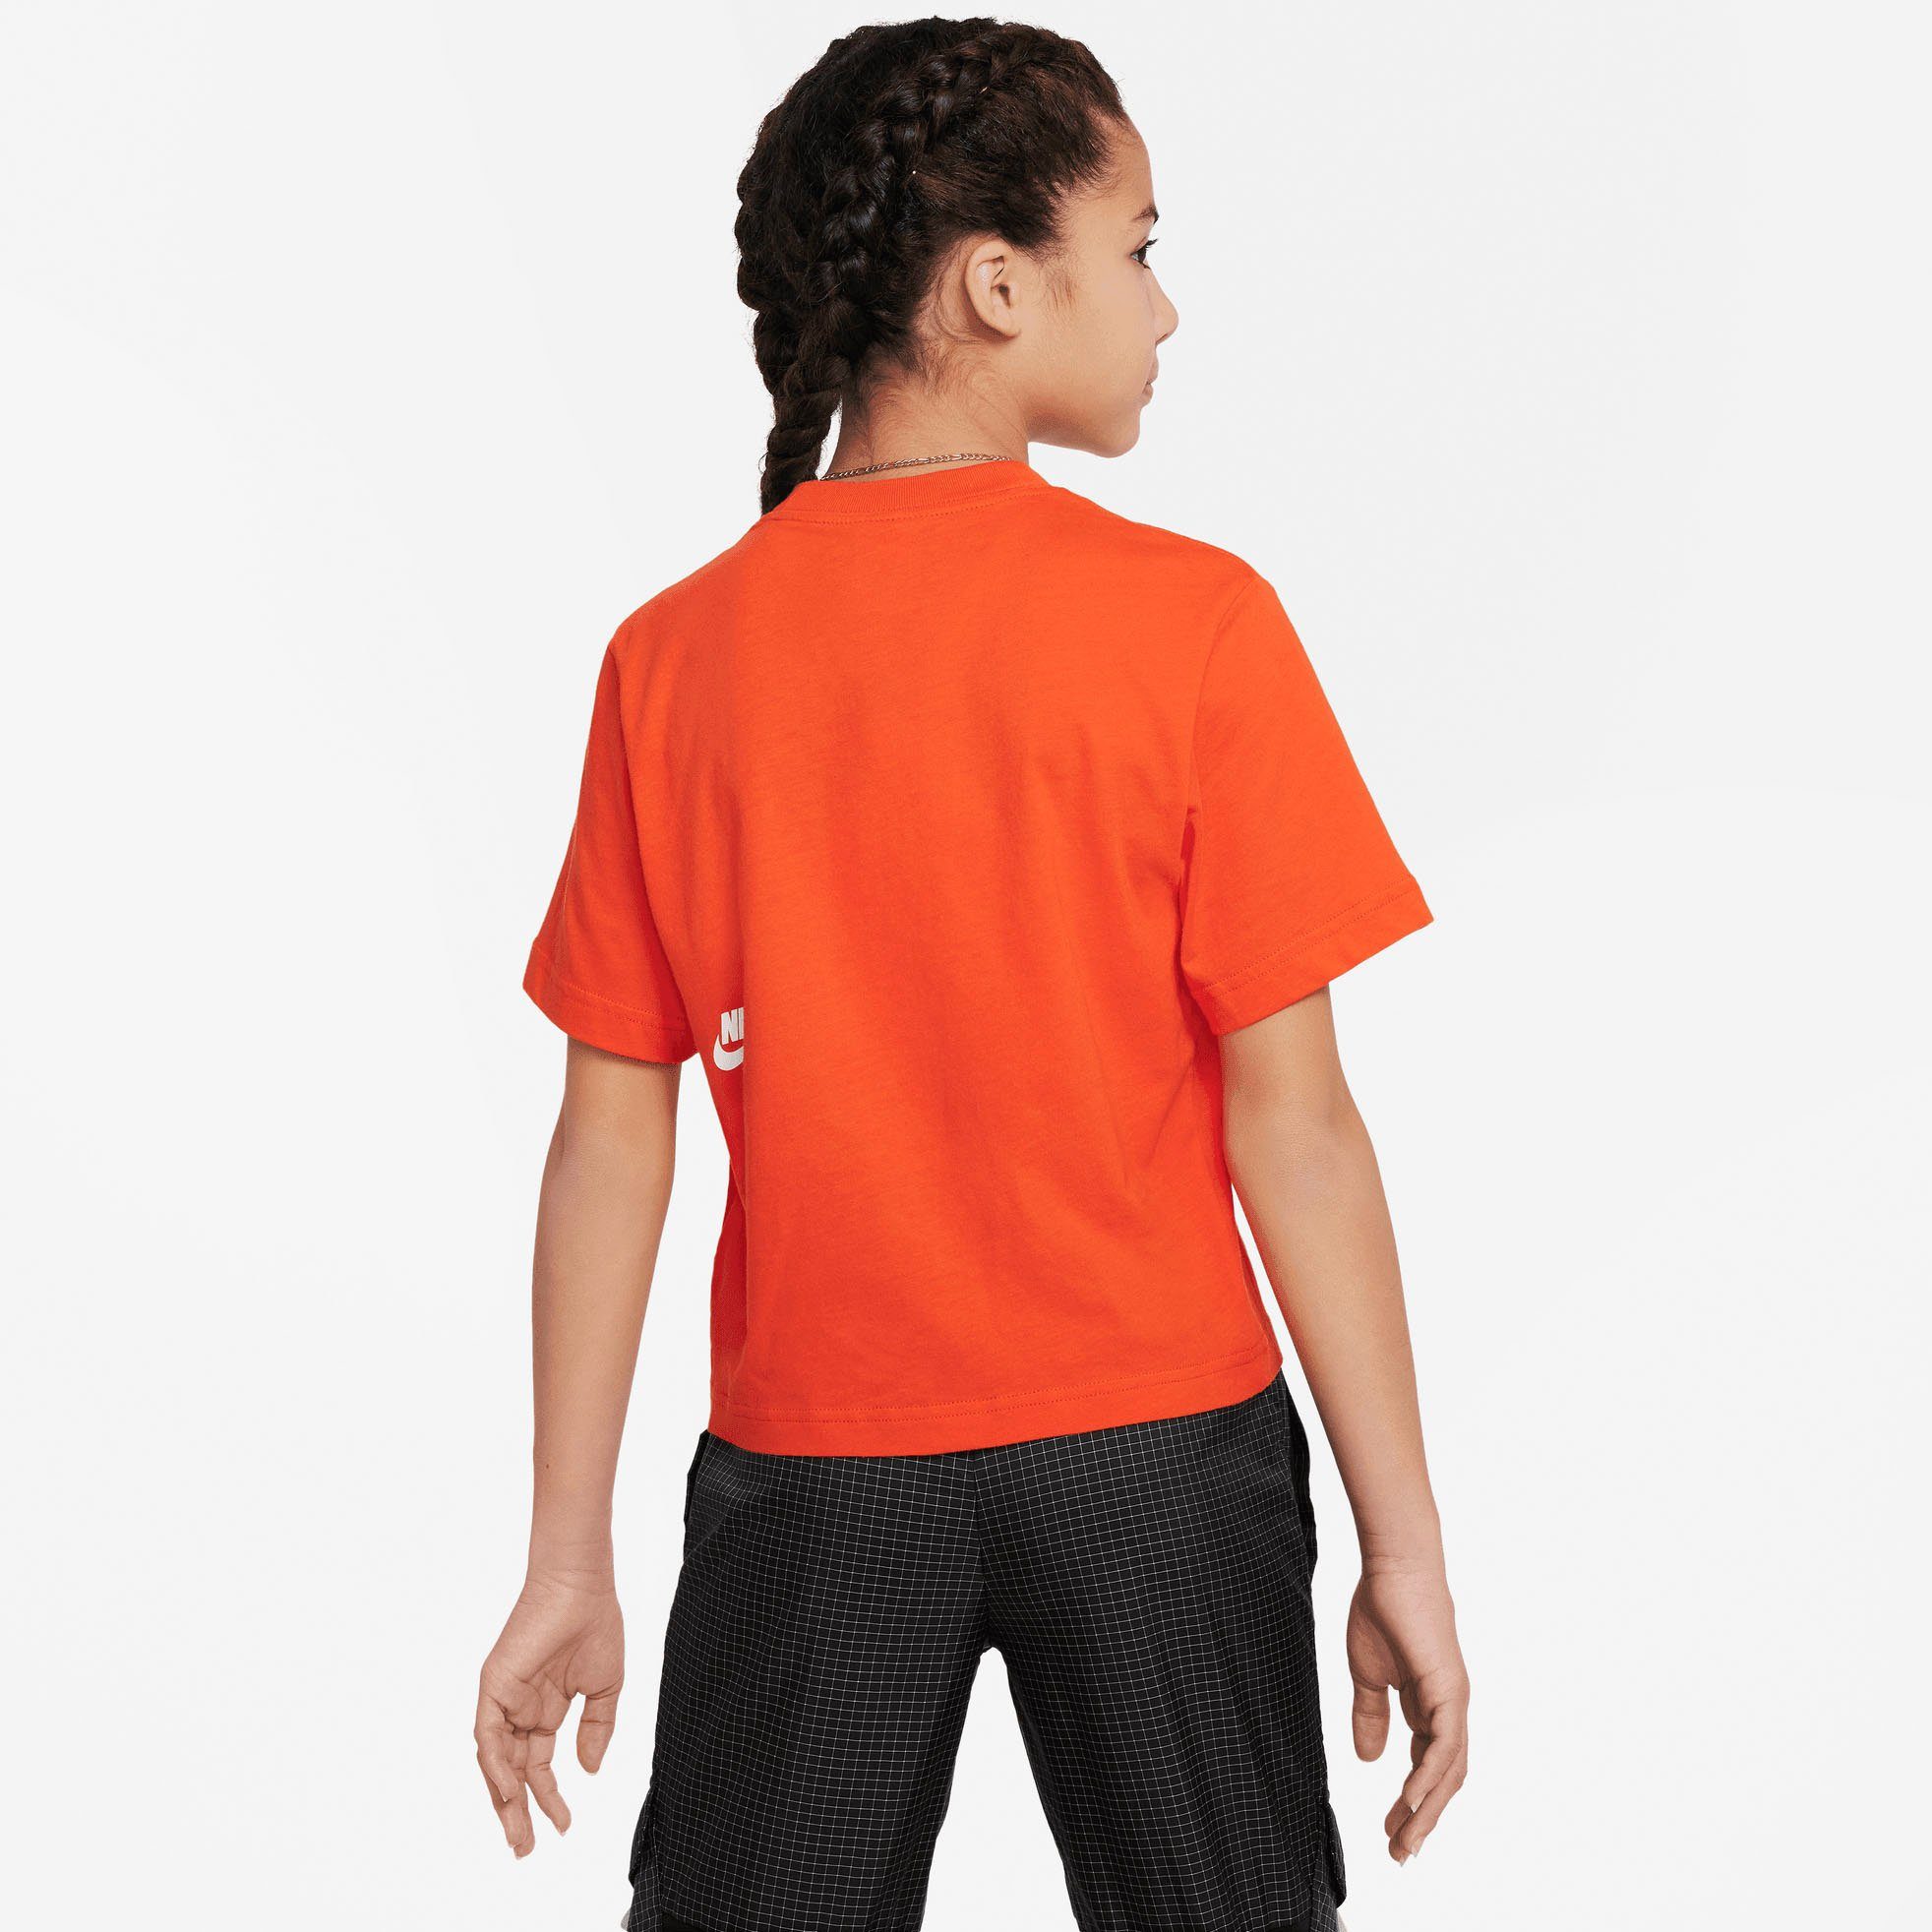 BOXY Sportswear RED NSW T-Shirt TEE RED/PICANTE ESSNTL PICANTE DNC Nike TEE G